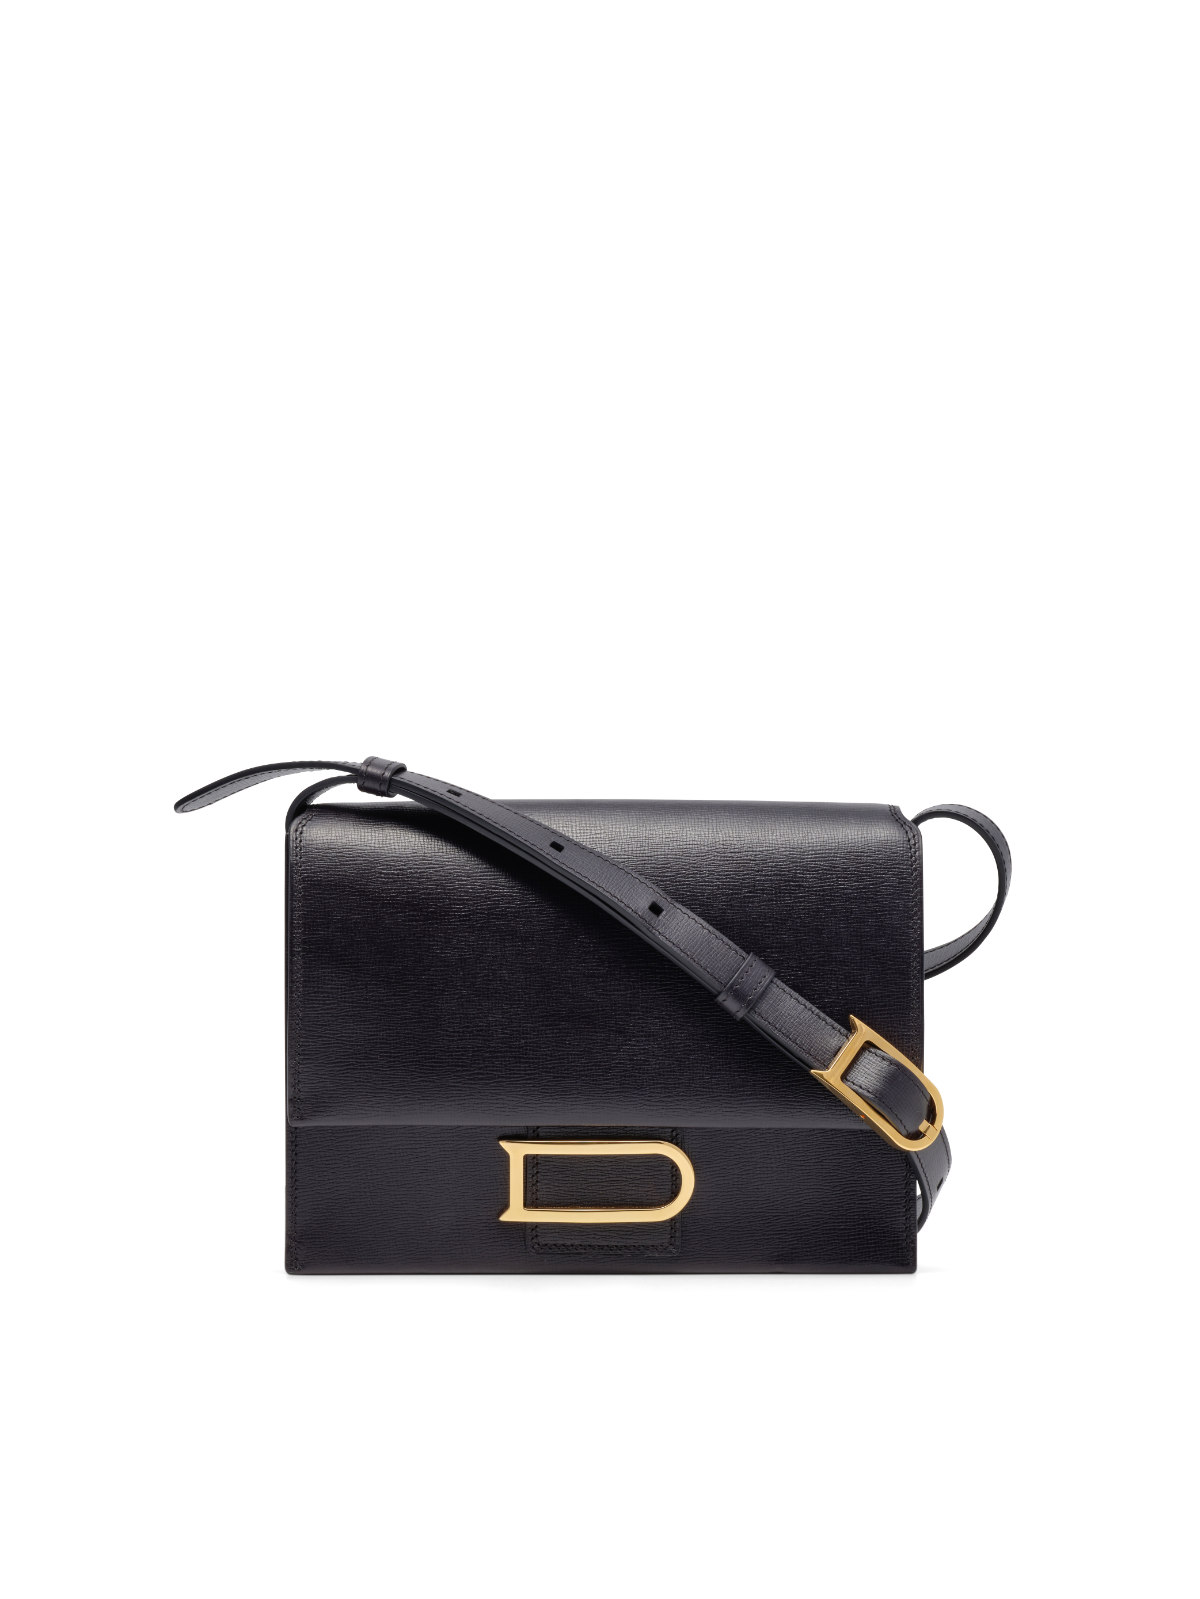 Delvaux Introduces Its New Family Of Bags: The Léonce